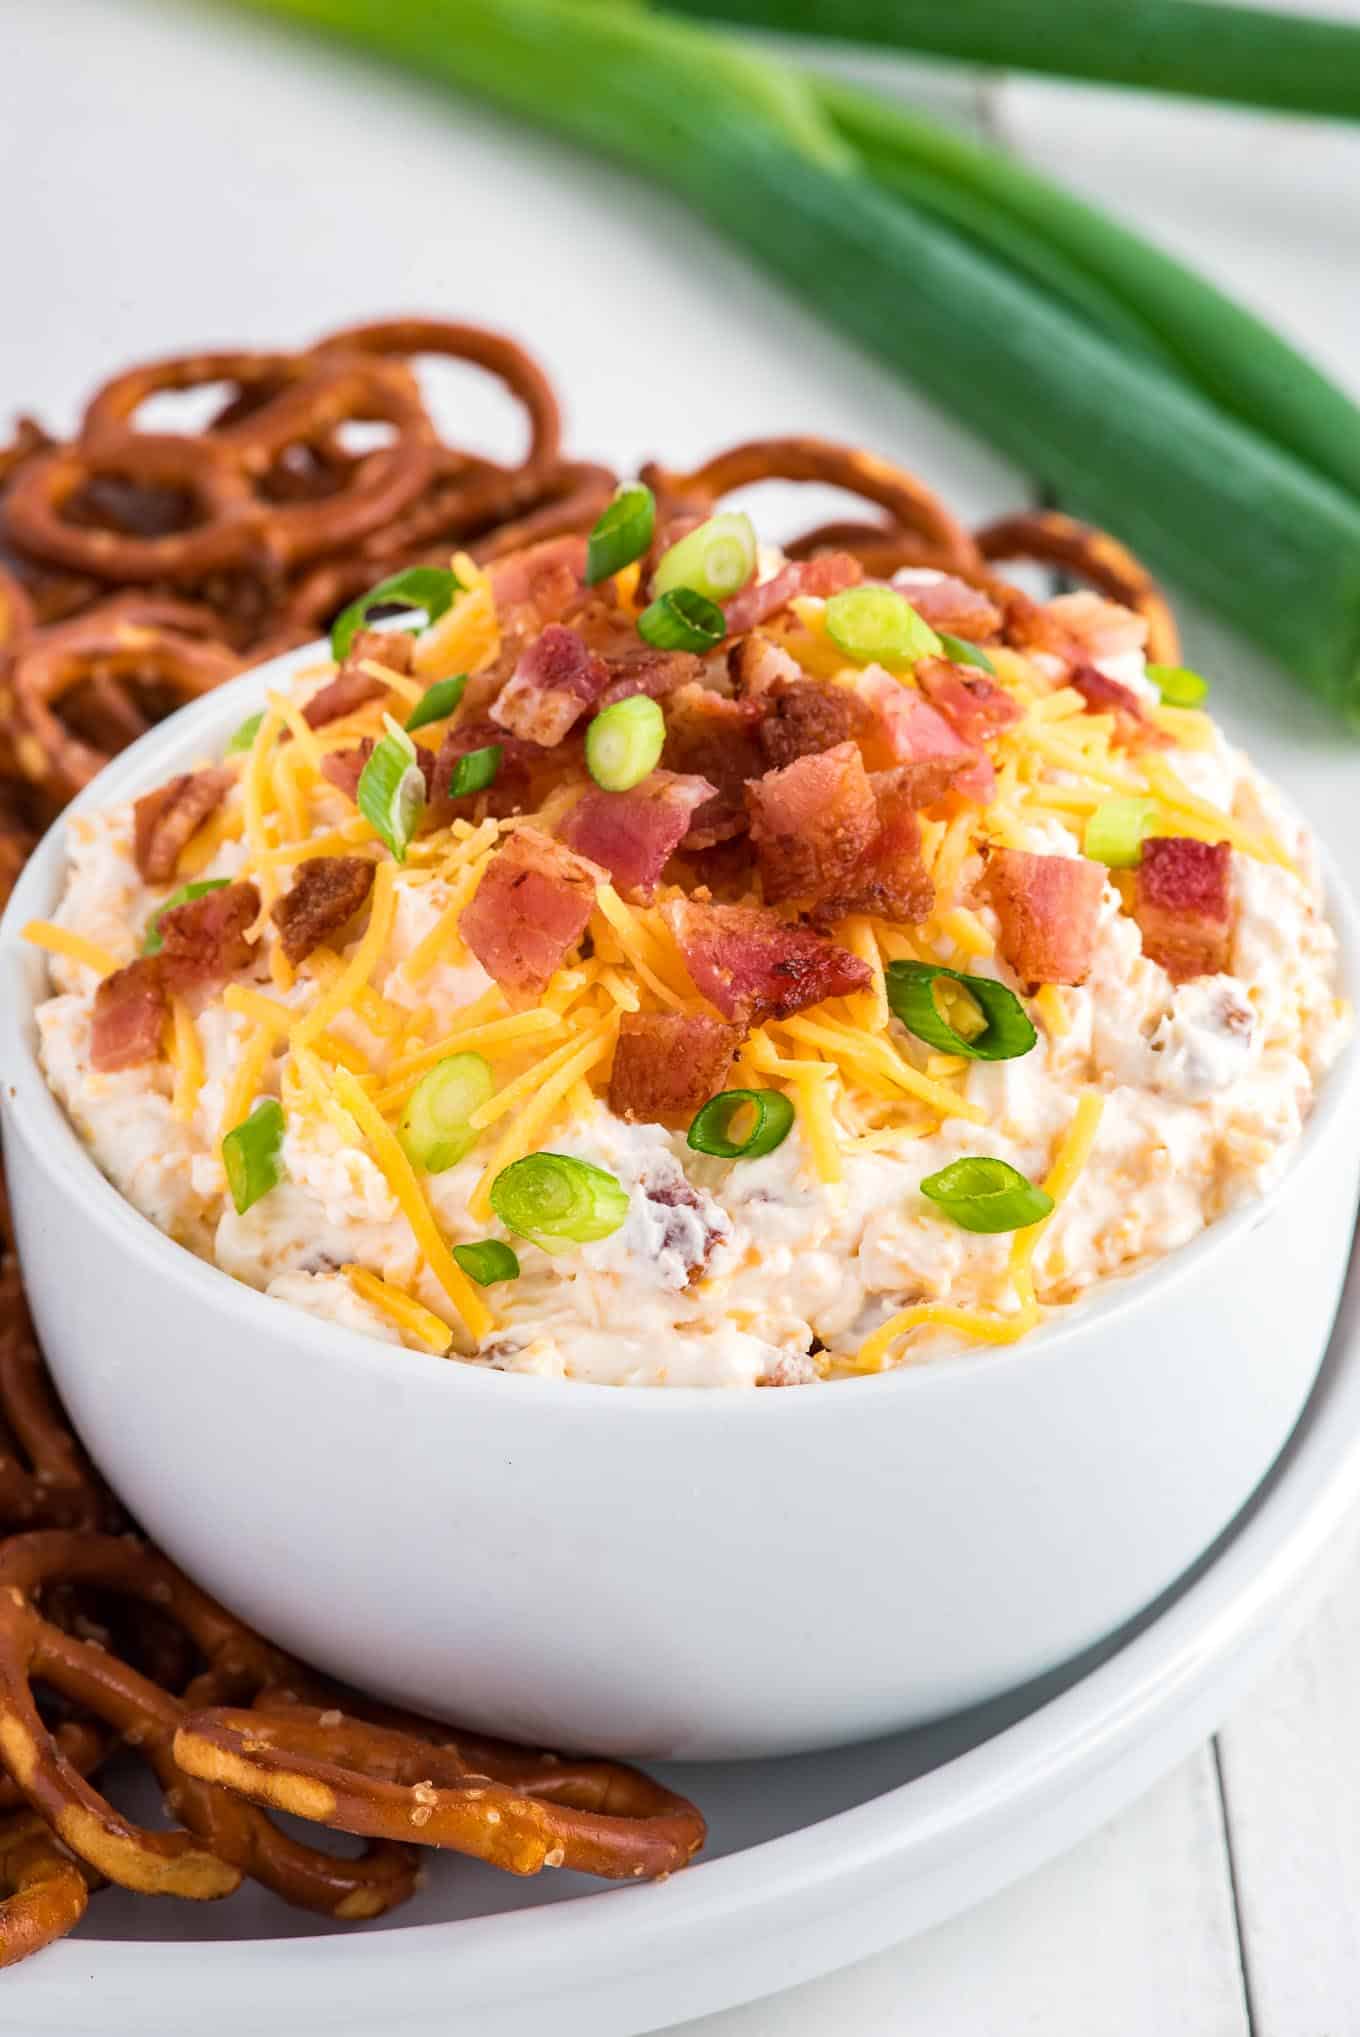 Bacon cheddar ranch dip in a bowl on a platter with pretzels.